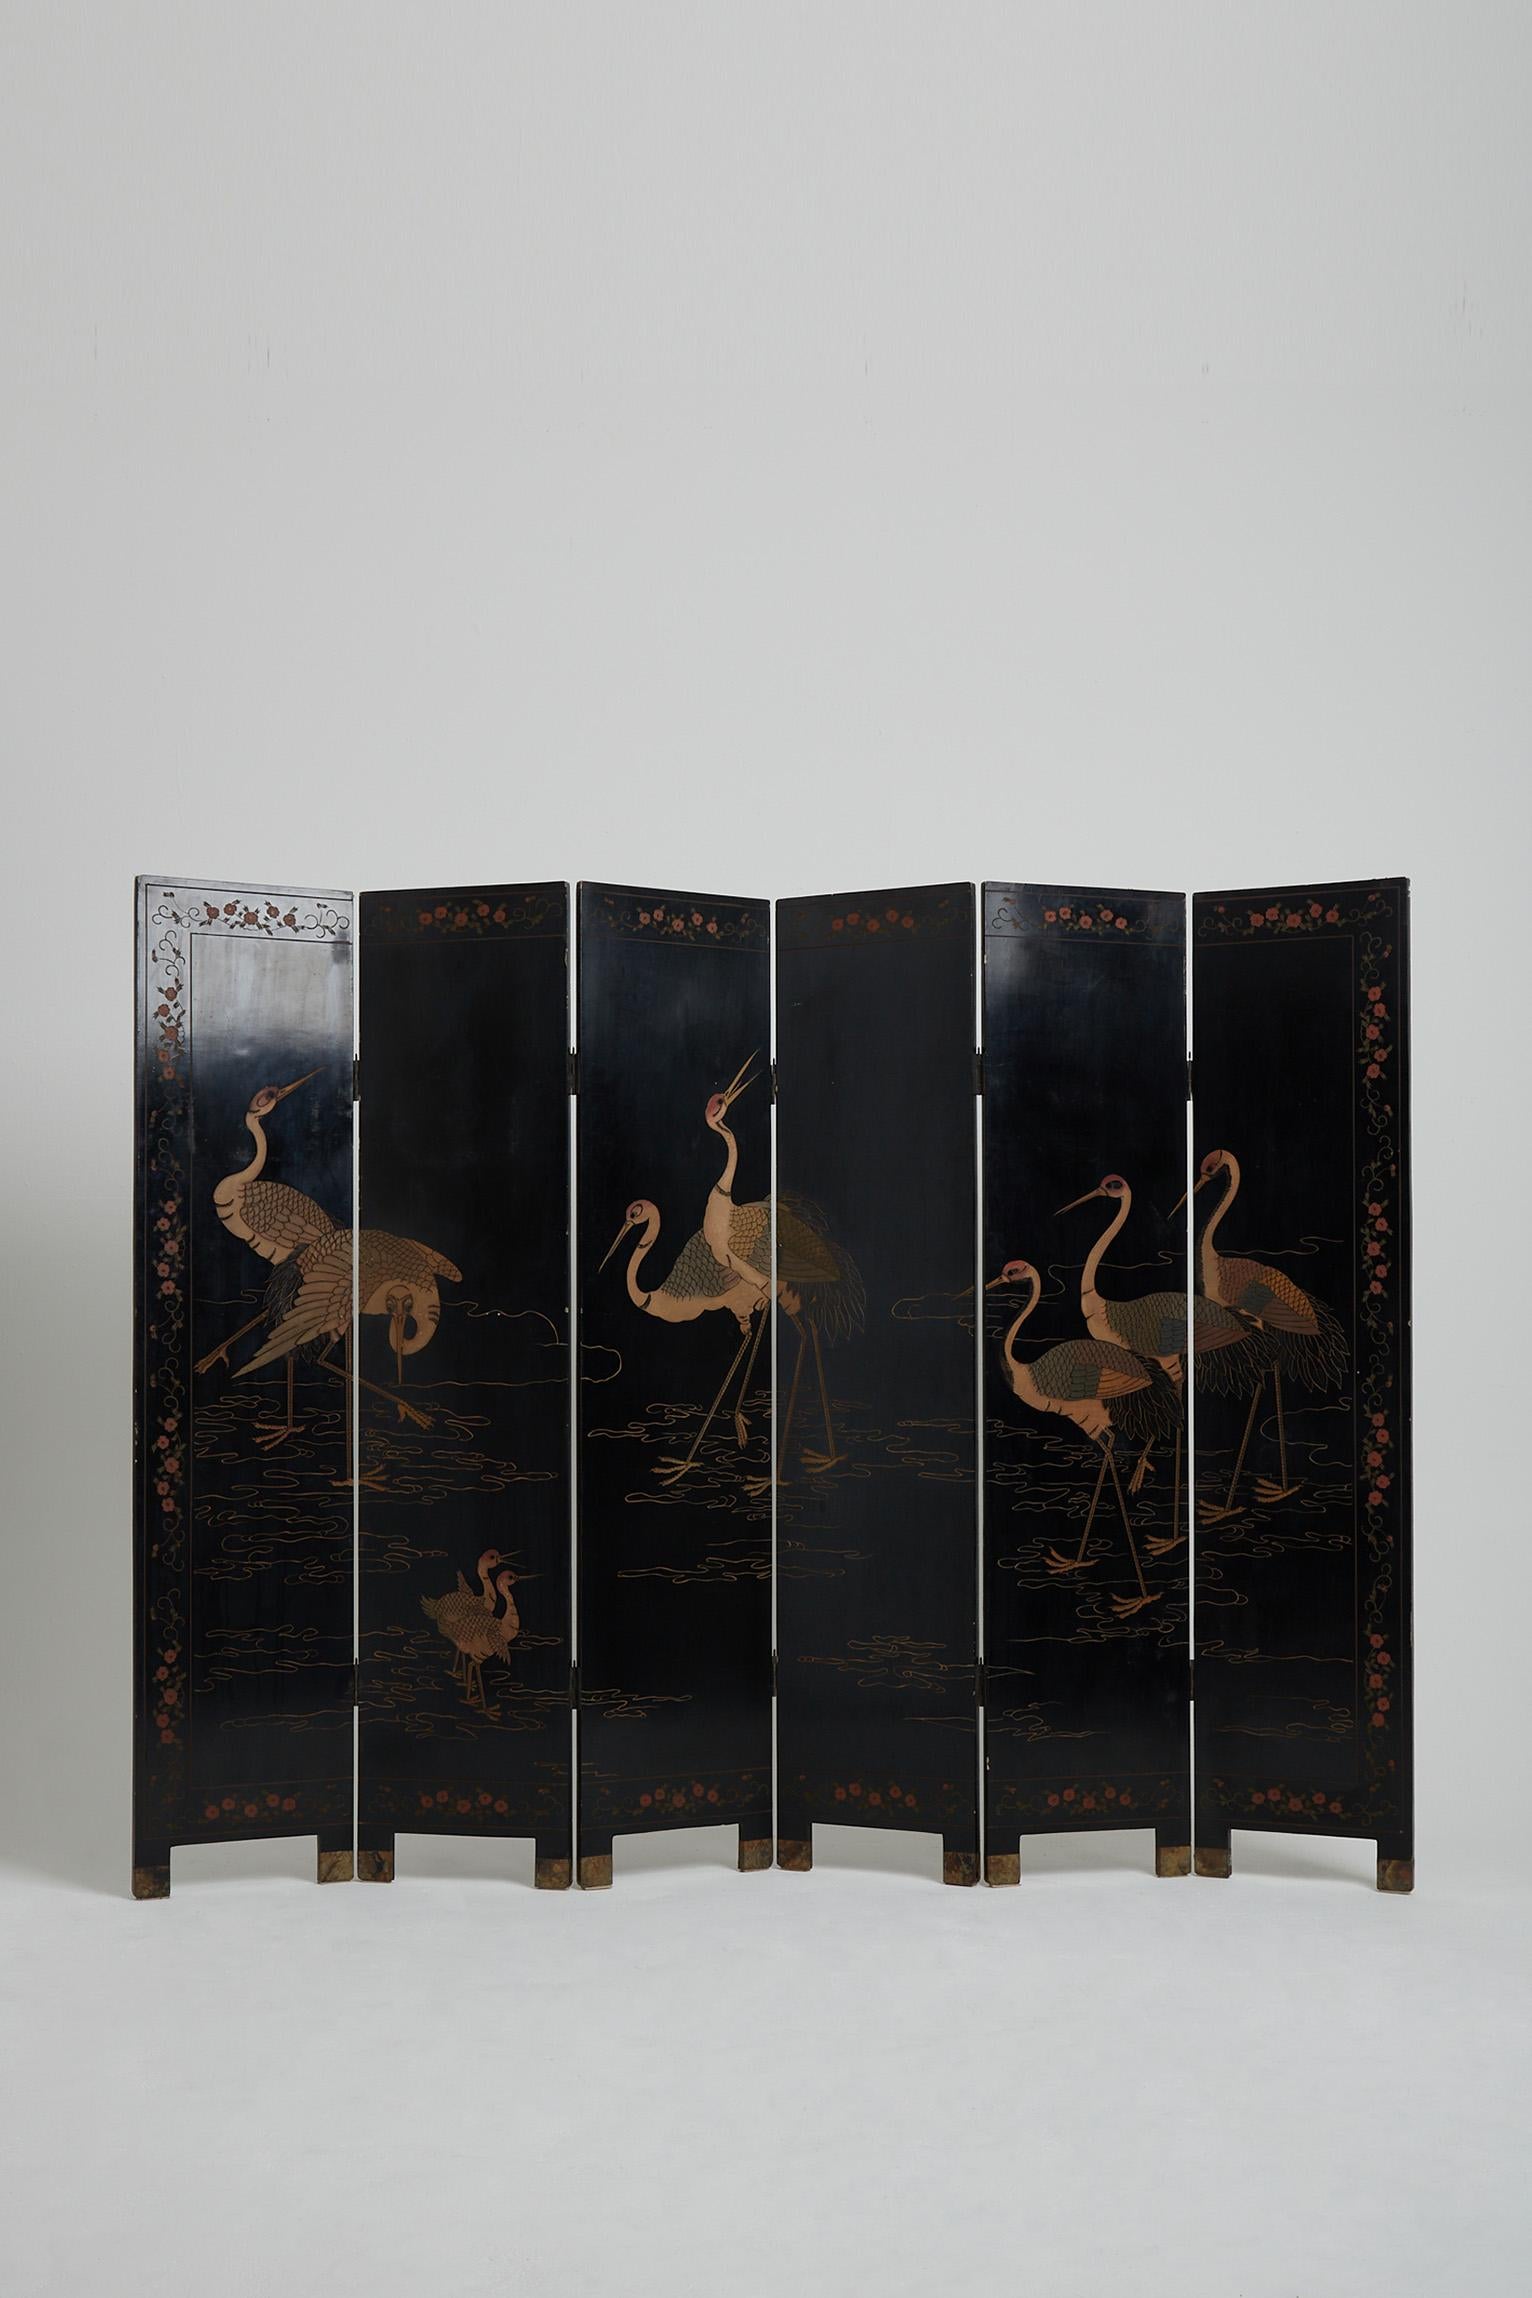 A brass mounted six-leaf and two-face coromandel lacquer screen, with birds, cranes, flowers and bamboo motifs.
China, first half of the 20th century.